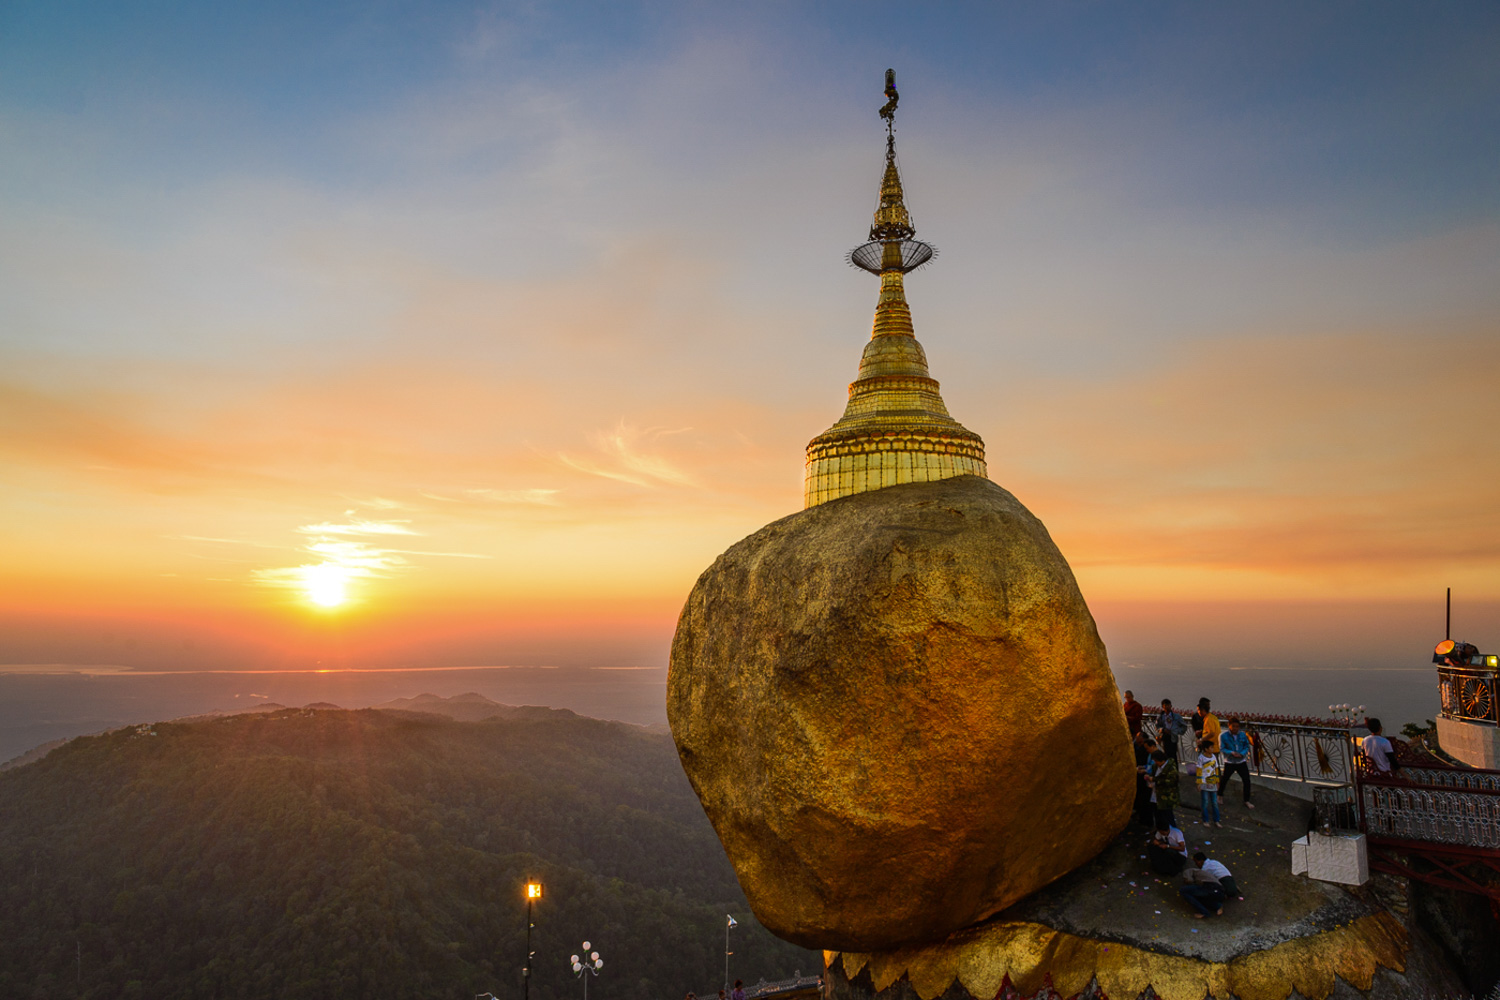 Gain spiritual inspiration from the gravity-defying Golden Rock in